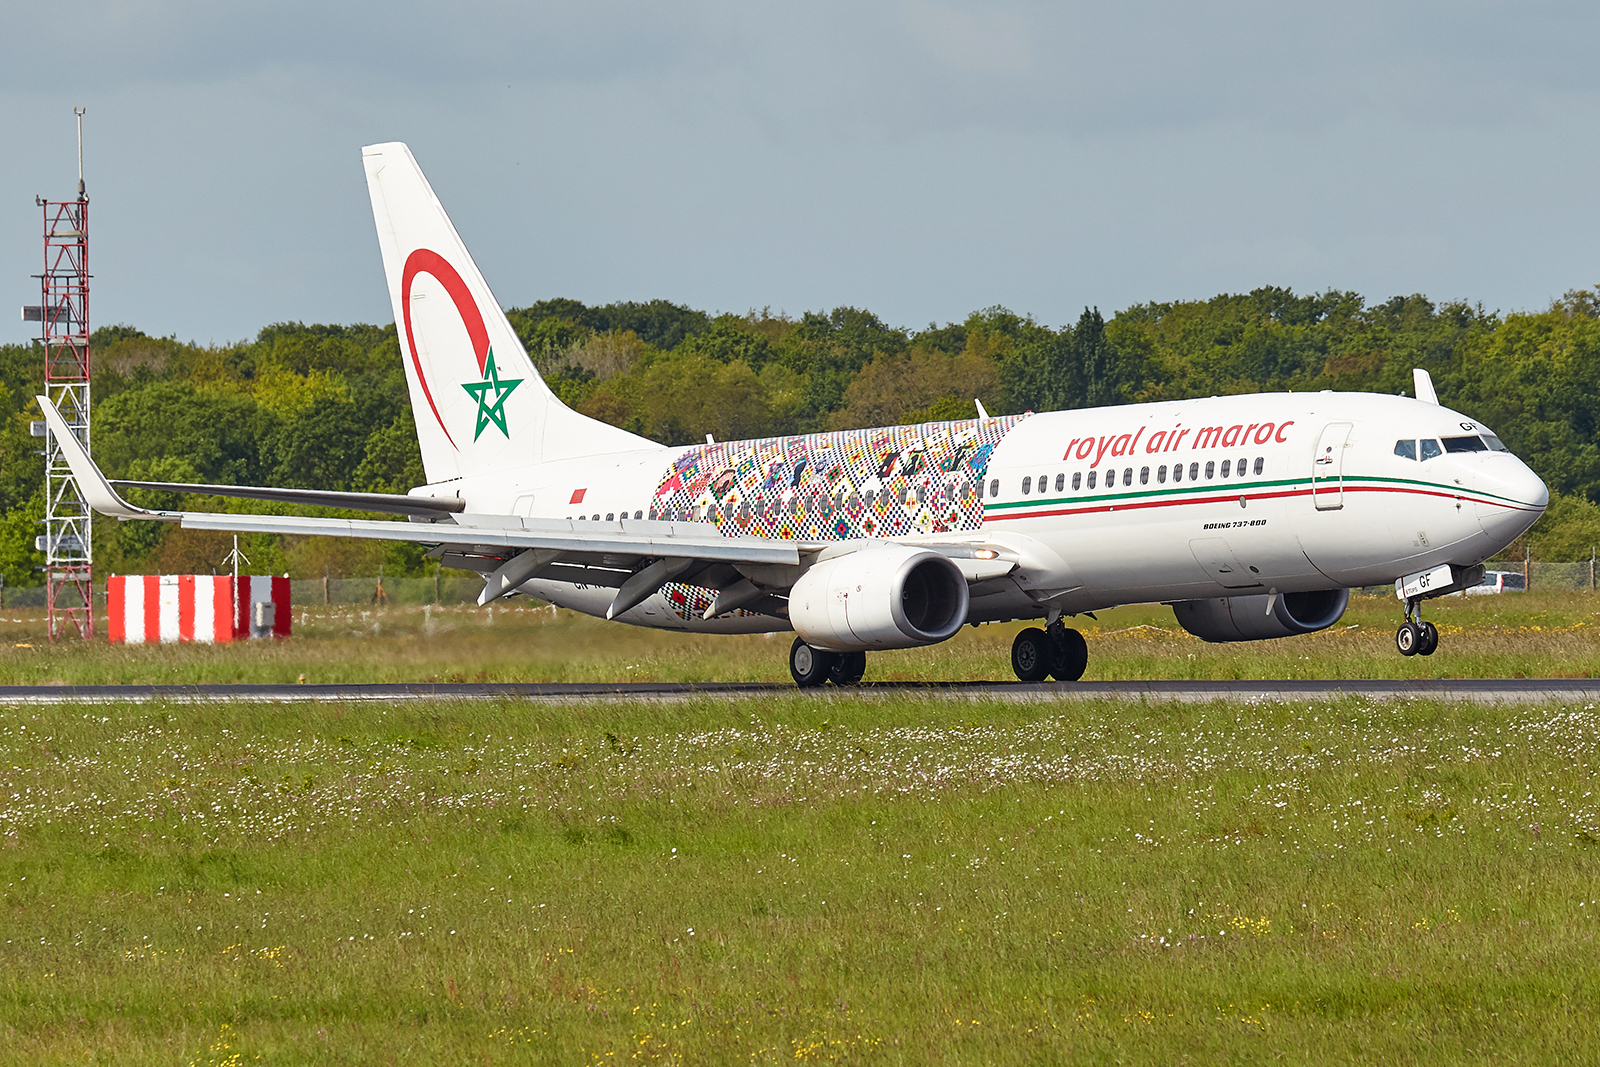 [26/02/2017]Boeing 737-800 (CN-RGF) Royal Air Maroc "Wings of African Art" Livery 1905030532305493216222359